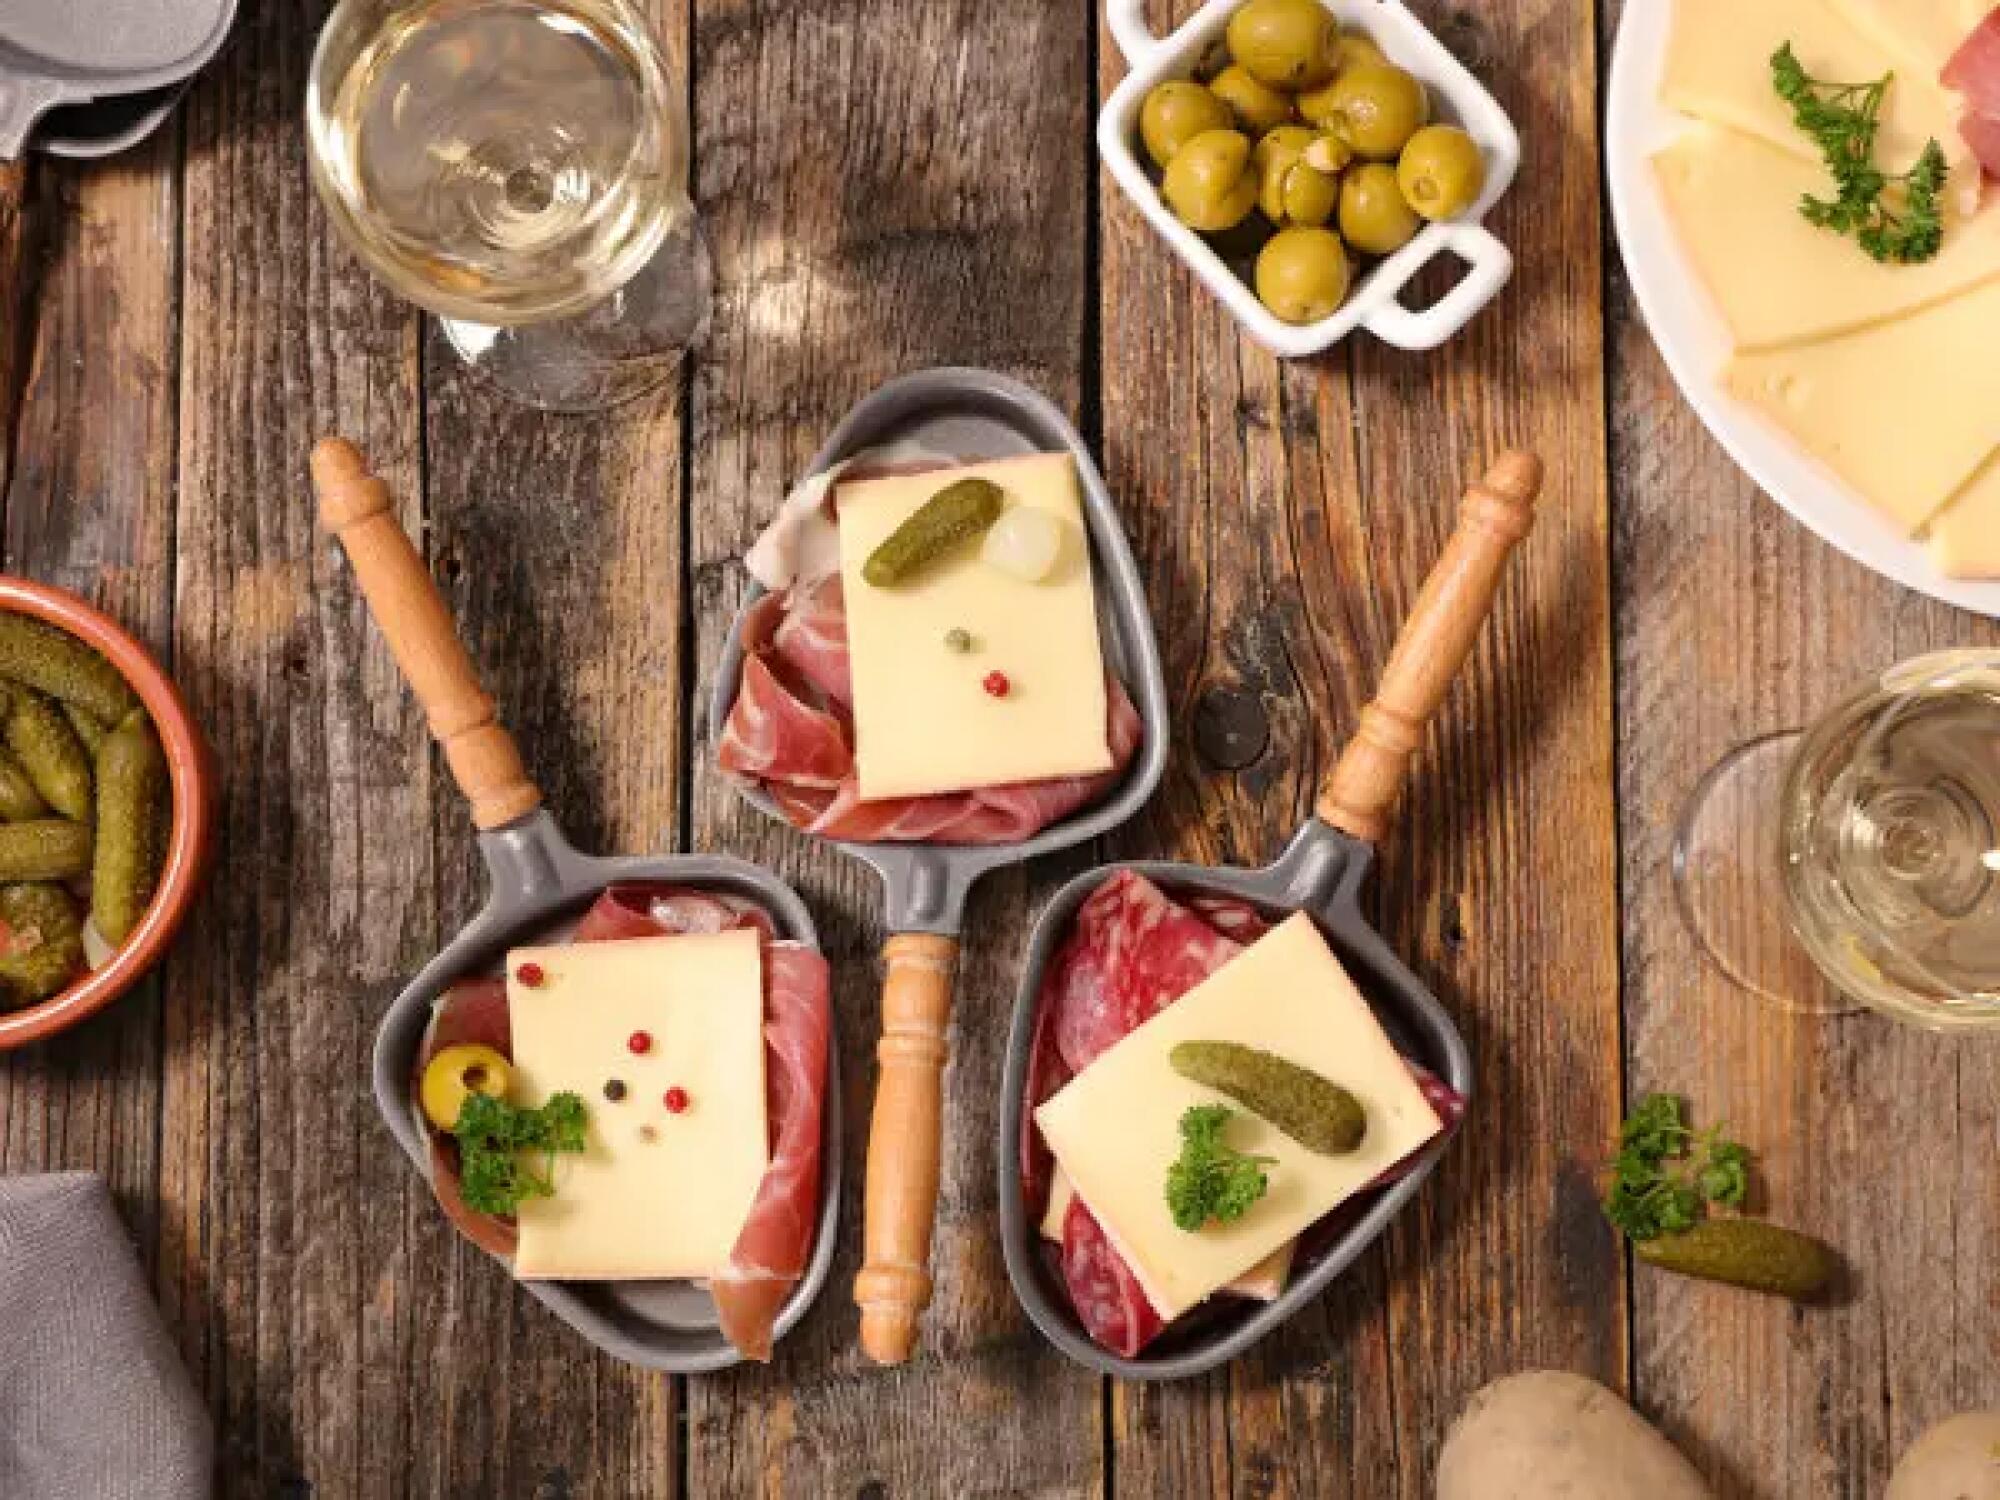 TH01_table-avec-fromage-raclette-charcuterie